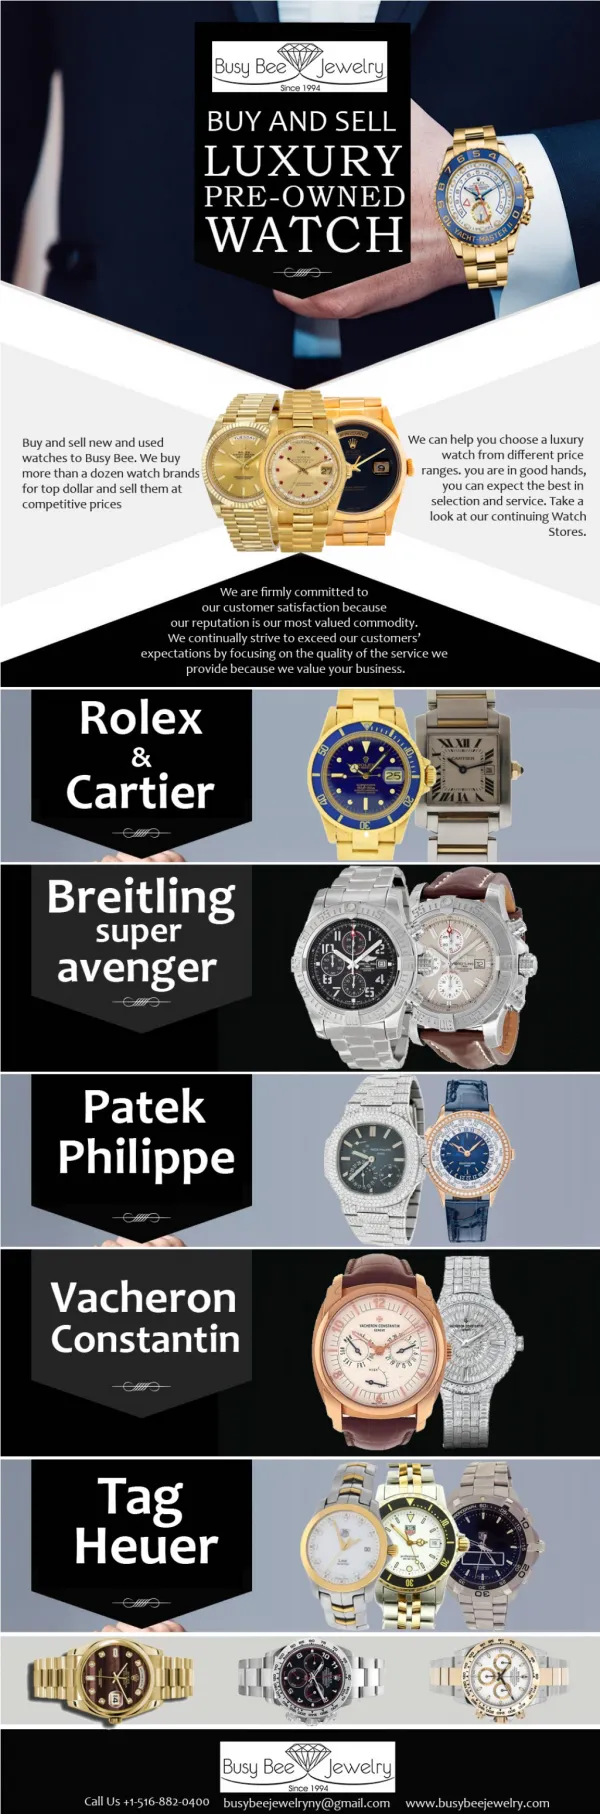 Best Place to Sell Your Big Brand Watches in New York